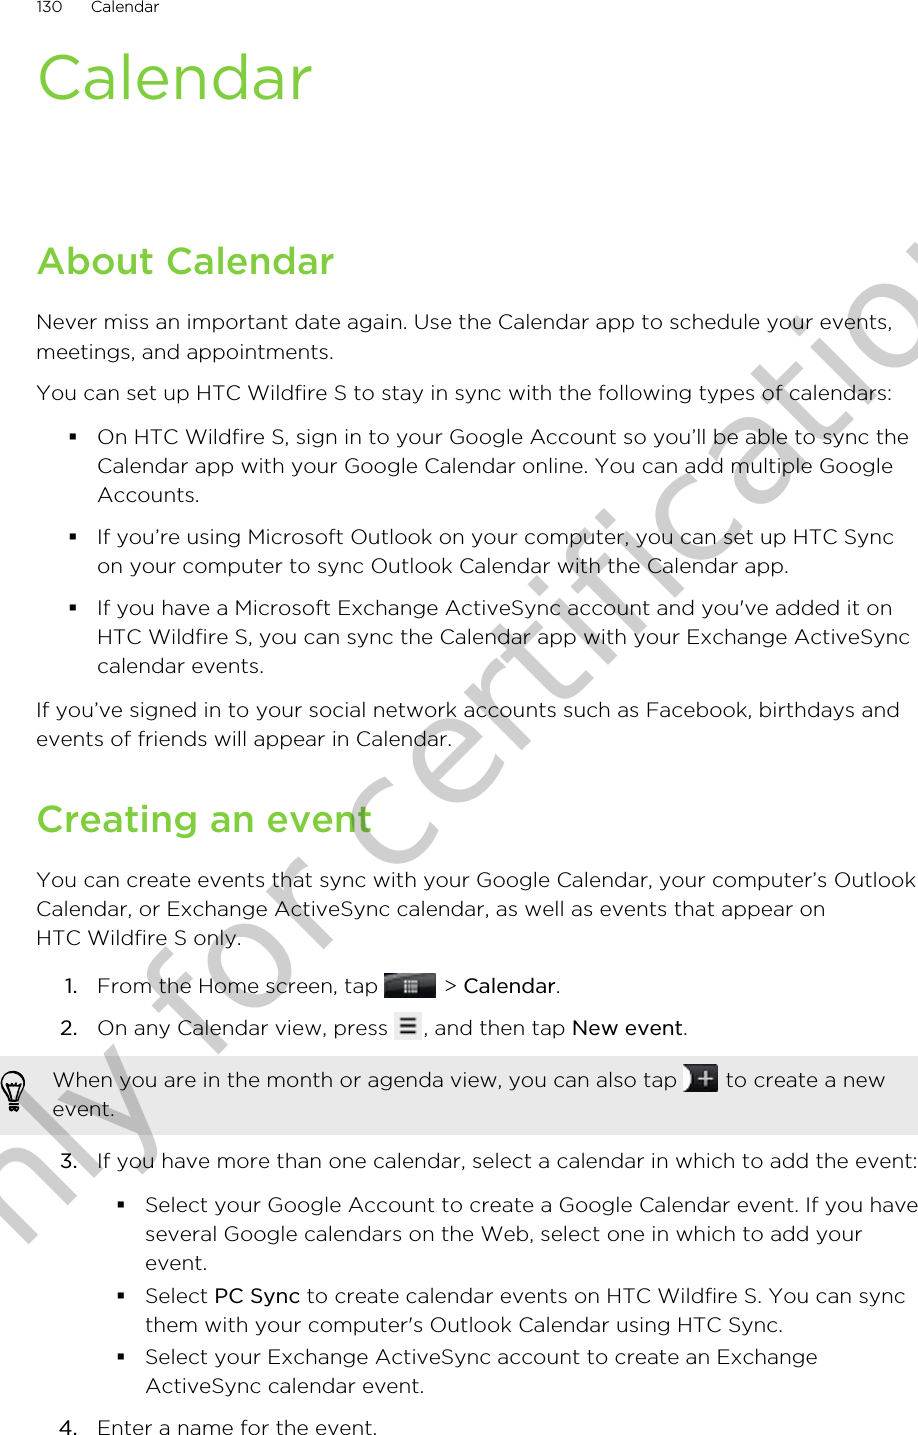 CalendarAbout CalendarNever miss an important date again. Use the Calendar app to schedule your events,meetings, and appointments.You can set up HTC Wildfire S to stay in sync with the following types of calendars:§On HTC Wildfire S, sign in to your Google Account so you’ll be able to sync theCalendar app with your Google Calendar online. You can add multiple GoogleAccounts.§If you’re using Microsoft Outlook on your computer, you can set up HTC Syncon your computer to sync Outlook Calendar with the Calendar app.§If you have a Microsoft Exchange ActiveSync account and you&apos;ve added it onHTC Wildfire S, you can sync the Calendar app with your Exchange ActiveSynccalendar events.If you’ve signed in to your social network accounts such as Facebook, birthdays andevents of friends will appear in Calendar.Creating an eventYou can create events that sync with your Google Calendar, your computer’s OutlookCalendar, or Exchange ActiveSync calendar, as well as events that appear onHTC Wildfire S only.1. From the Home screen, tap   &gt; Calendar.2. On any Calendar view, press  , and then tap New event. When you are in the month or agenda view, you can also tap   to create a newevent.3. If you have more than one calendar, select a calendar in which to add the event:§Select your Google Account to create a Google Calendar event. If you haveseveral Google calendars on the Web, select one in which to add yourevent.§Select PC Sync to create calendar events on HTC Wildfire S. You can syncthem with your computer&apos;s Outlook Calendar using HTC Sync.§Select your Exchange ActiveSync account to create an ExchangeActiveSync calendar event.4. Enter a name for the event.130 CalendarOnly for certification